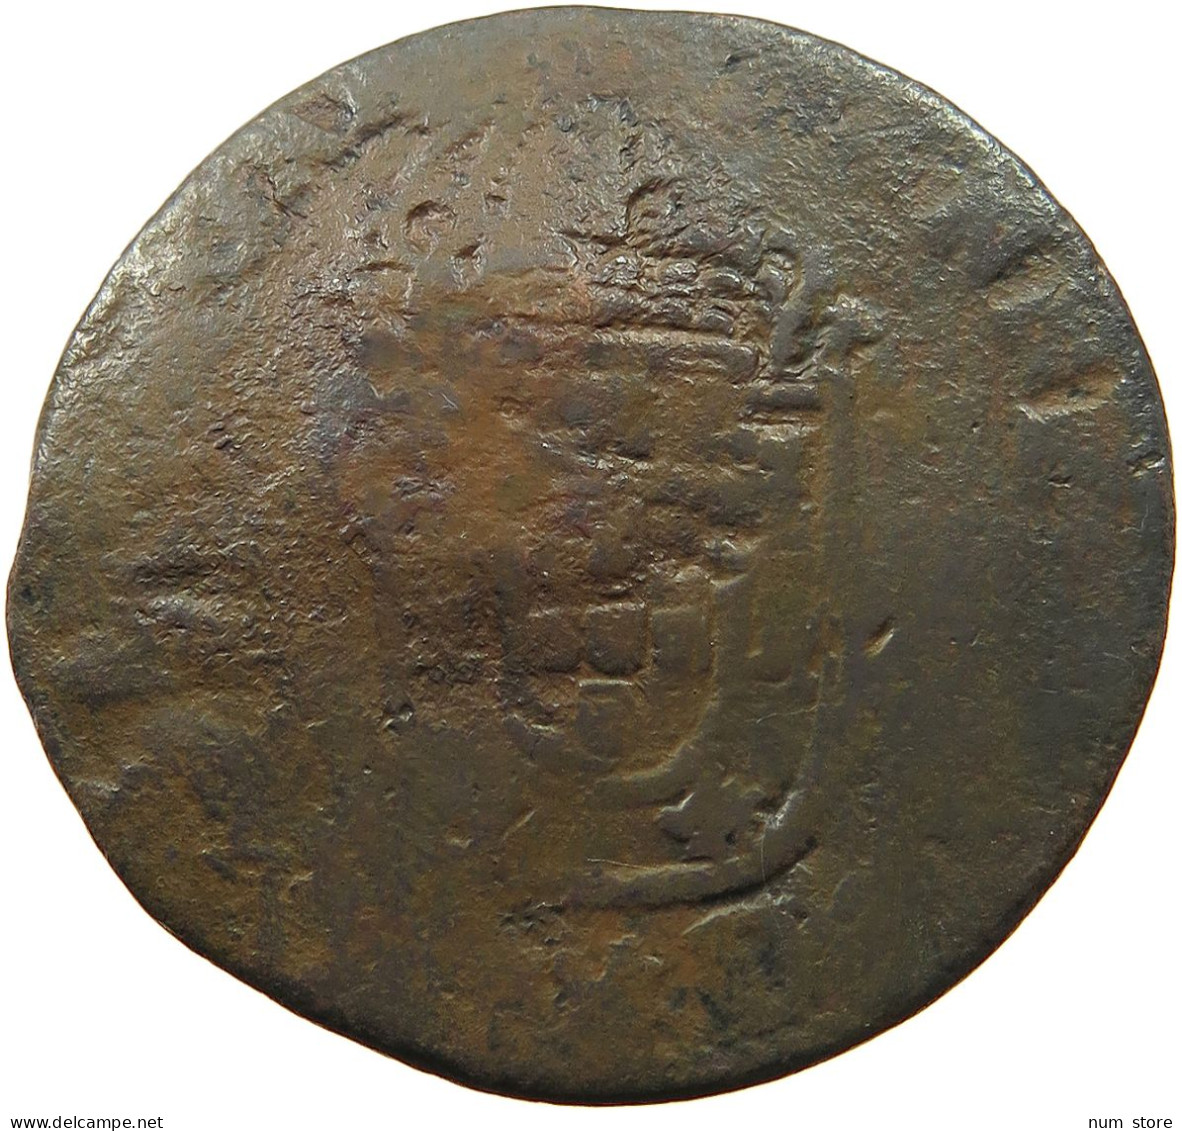 MOZAMBIQUE REIS  MOZAMBIQUE COPPER REIS COUNTERMARKED MR VERY RARE #t059 0385 - Mosambik